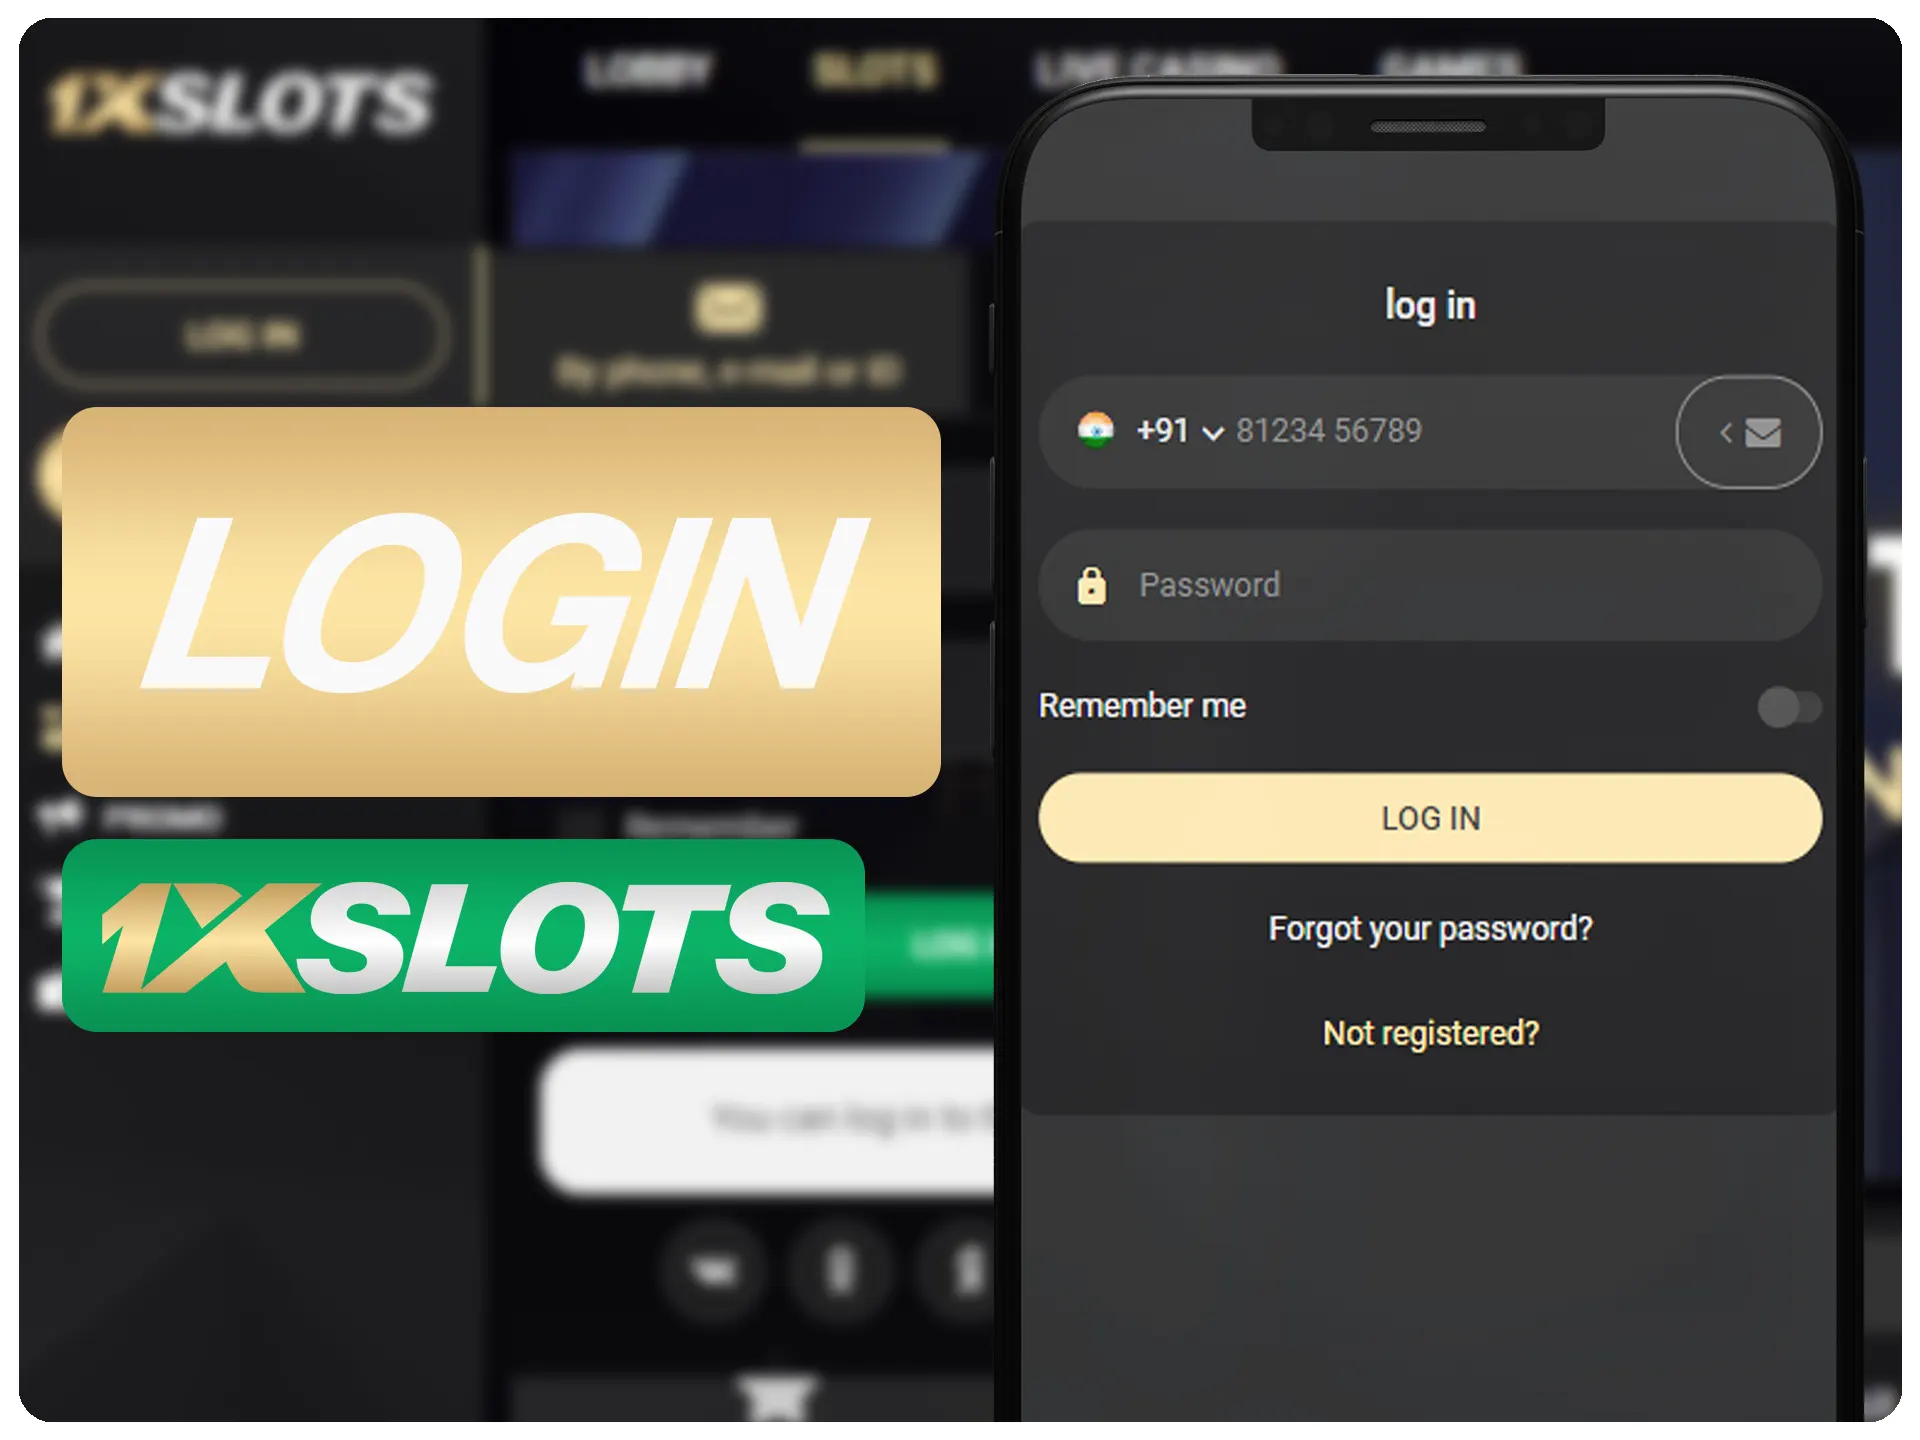 Log in on the main page using your 1xSlots account.